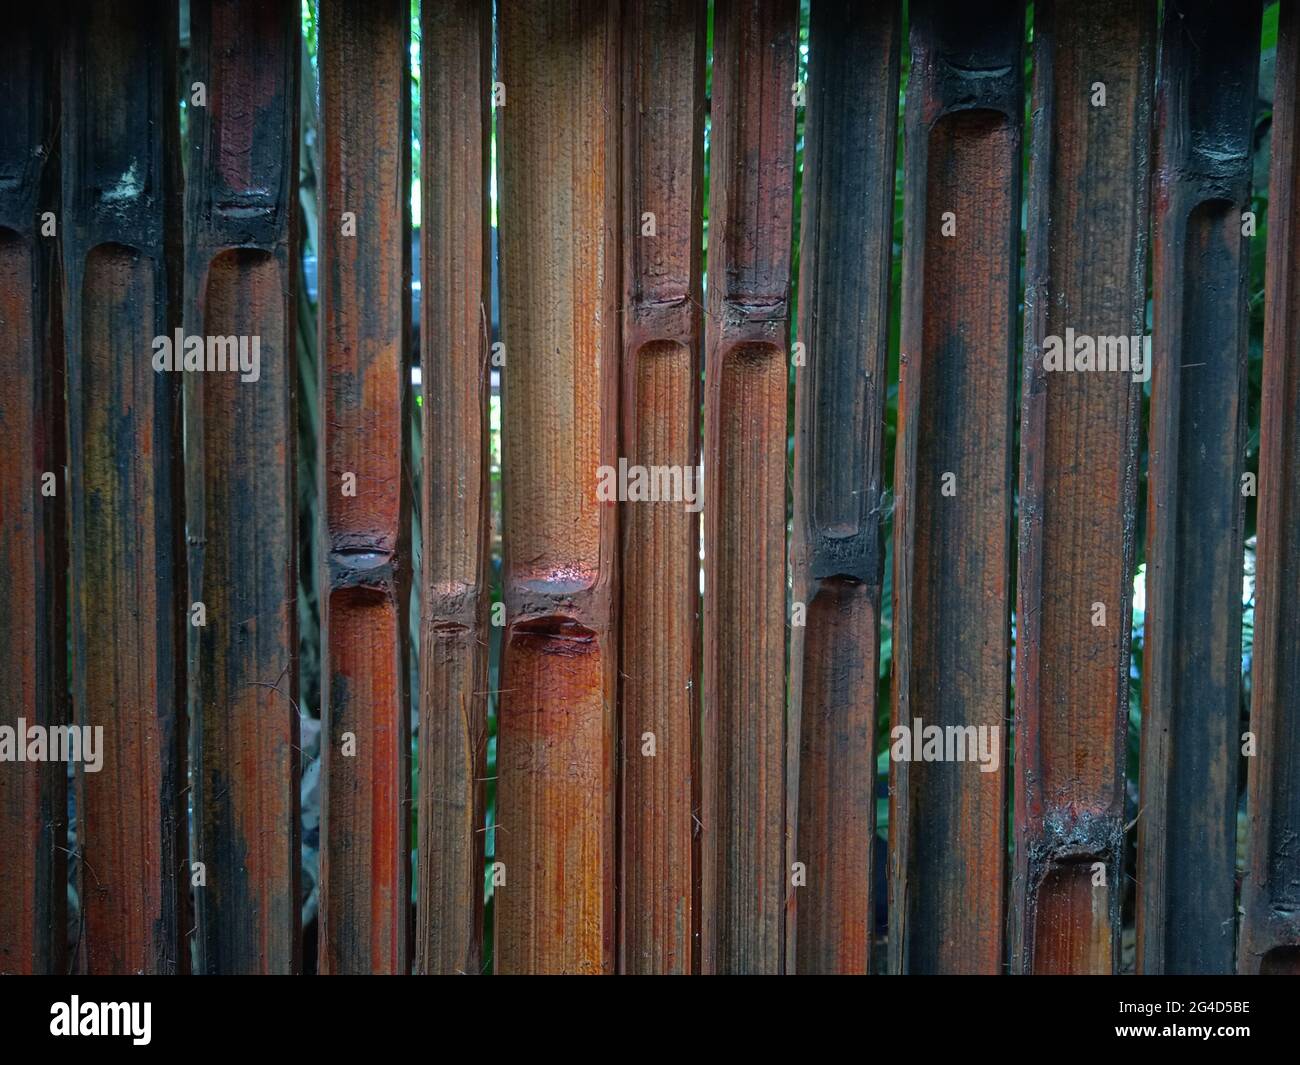 Bamboo fence wall with beautiful patterns , Woden background , Copy space Stock Photo